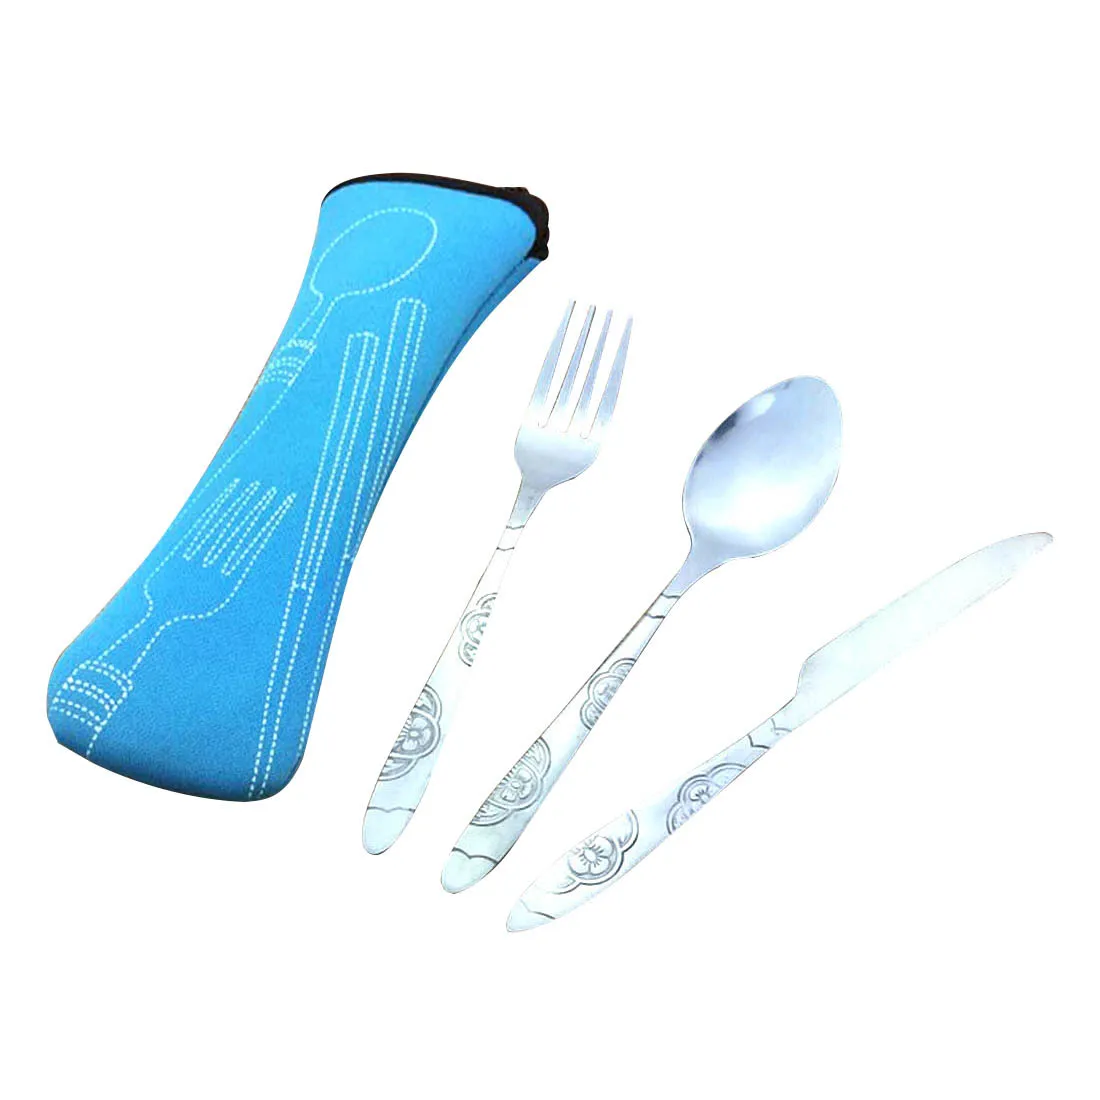 iTECHOR 3pcs/lot Stainless Steel Tableware set camping Travel Portable Cutlery Fork Knife Dinnerware Set with cloth bag hot sale C18112701